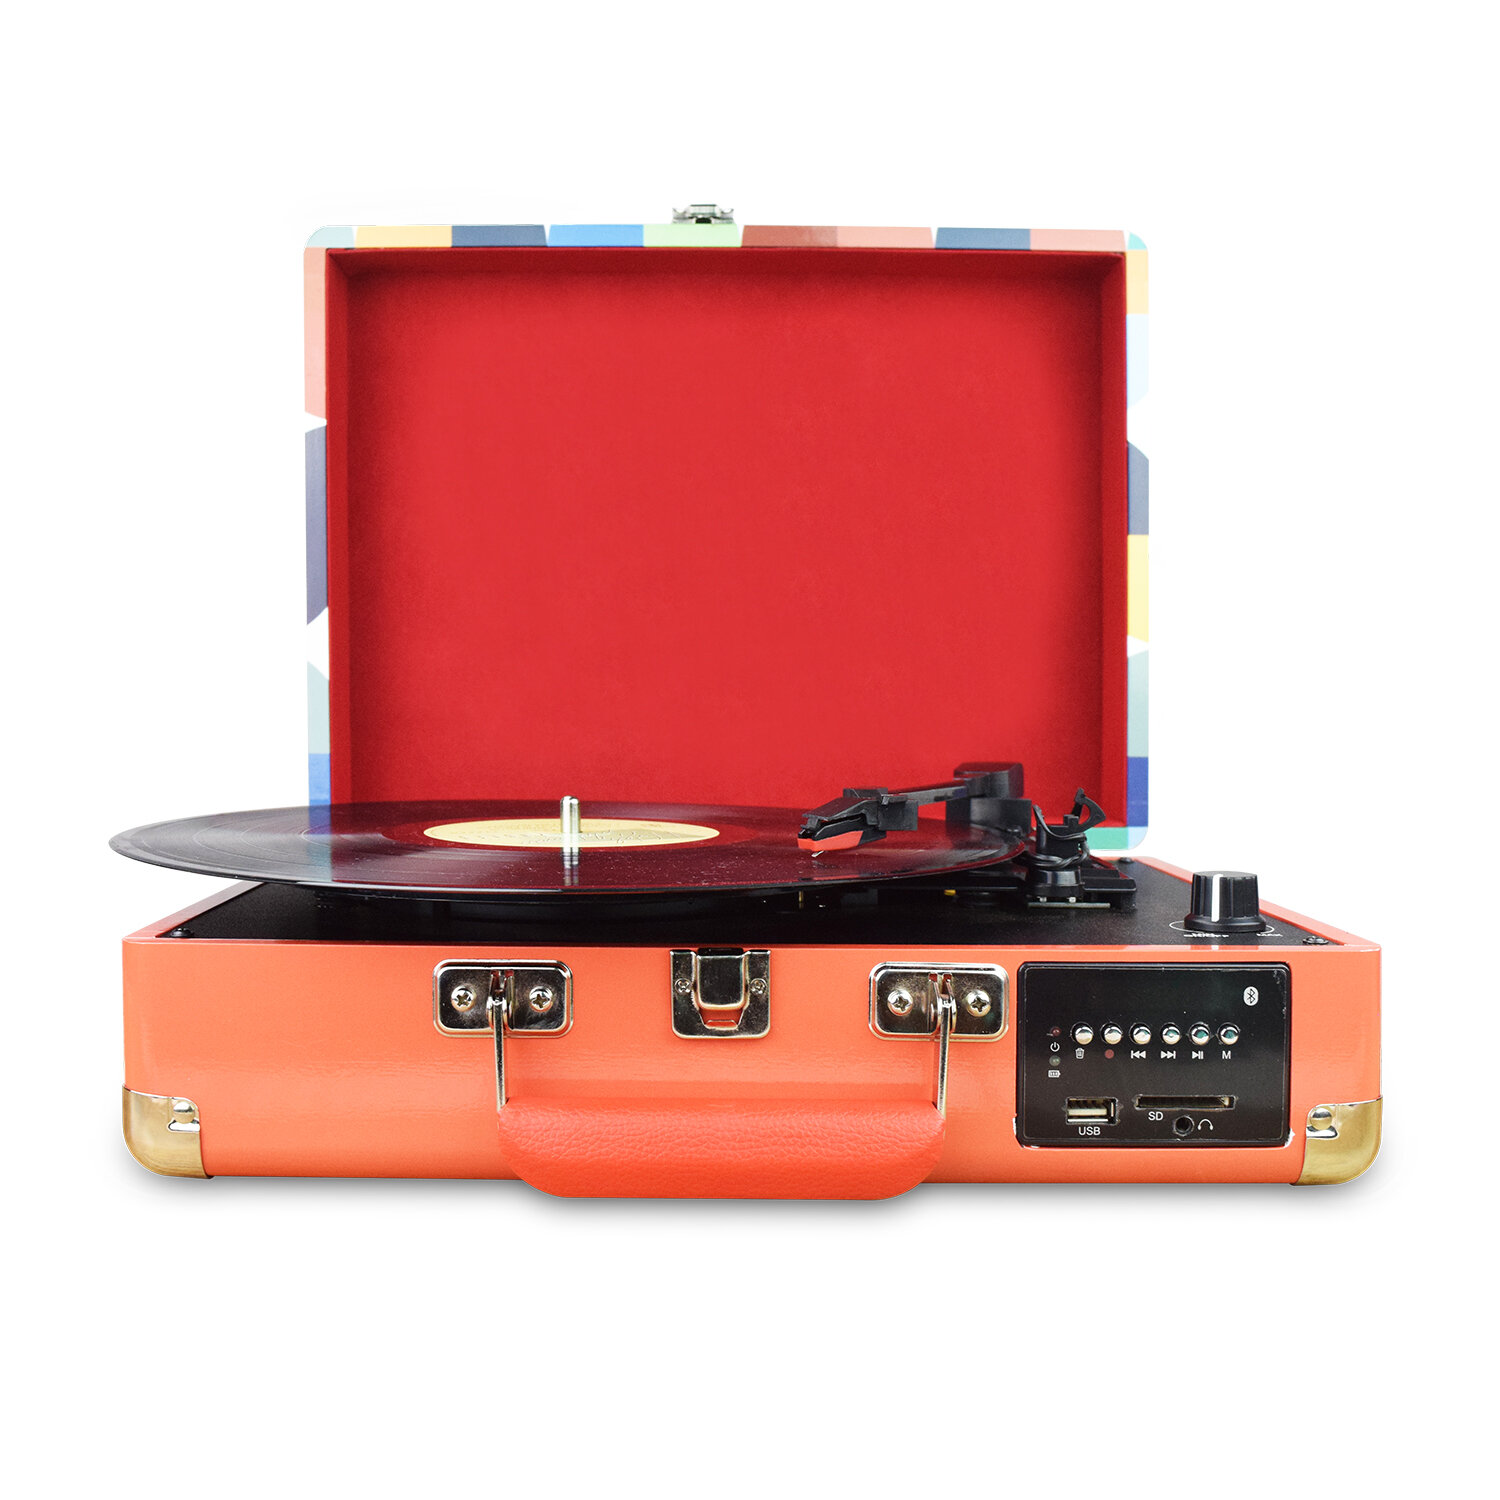 DIGITNOW Decorative Record Player, Turntable Suitcase With Multi-Function -  Orange & Reviews